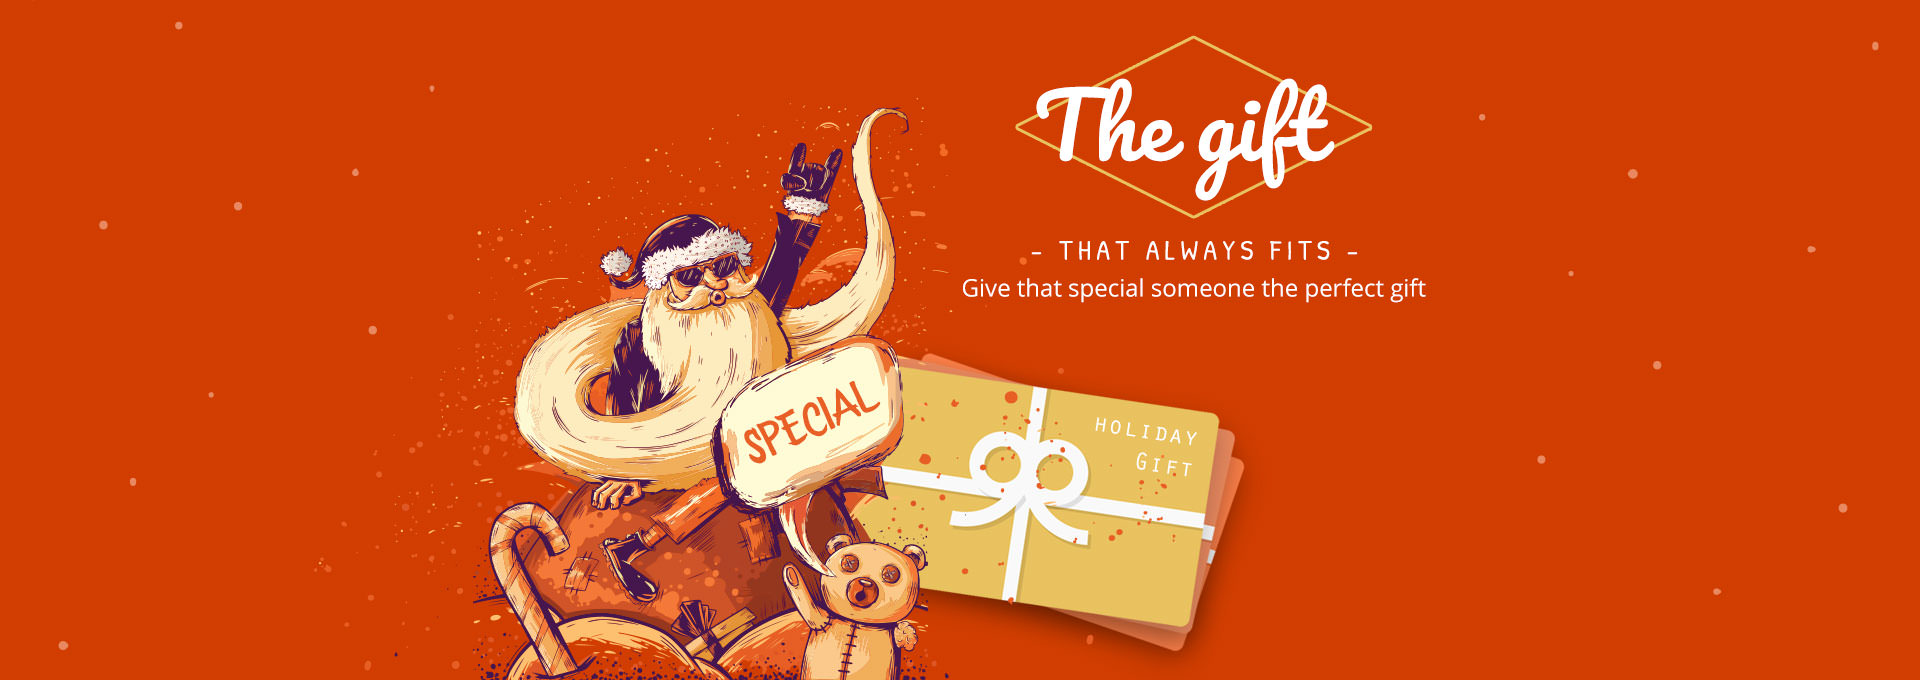 Magento 2 gift card extension